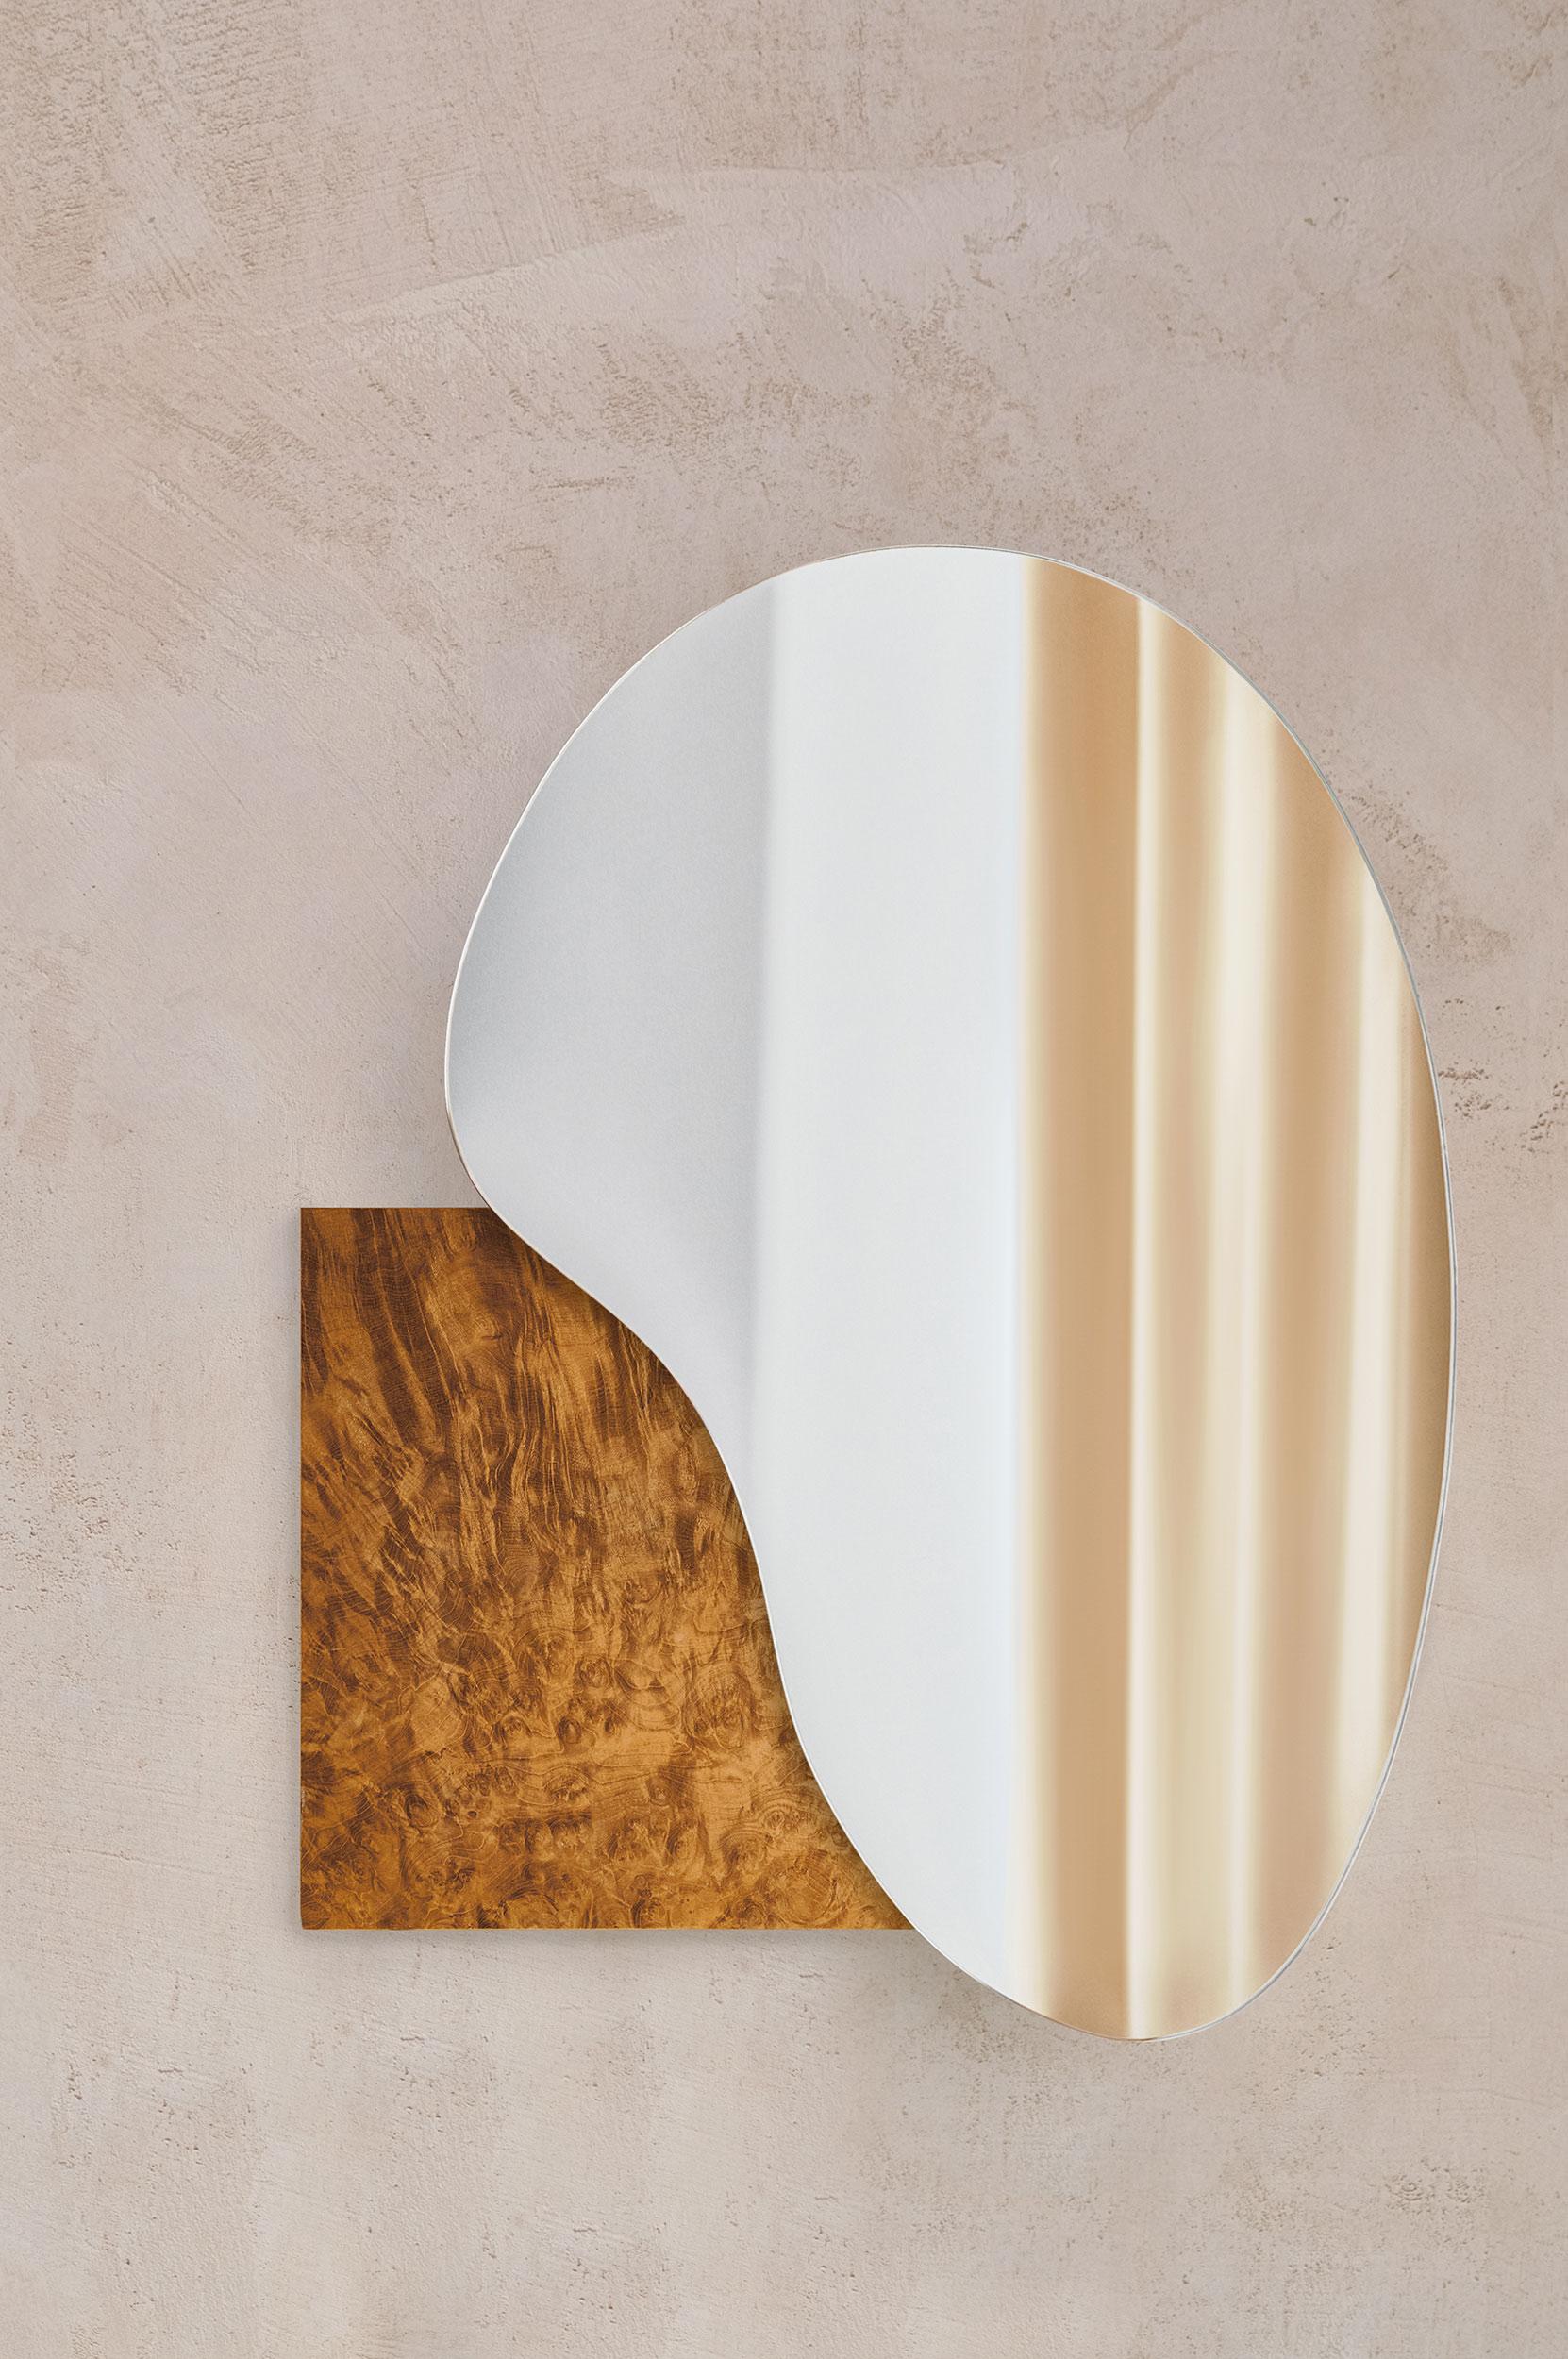 Painted Modern Wall Mirror Lake 4 by Noom with Brushed Brass Base